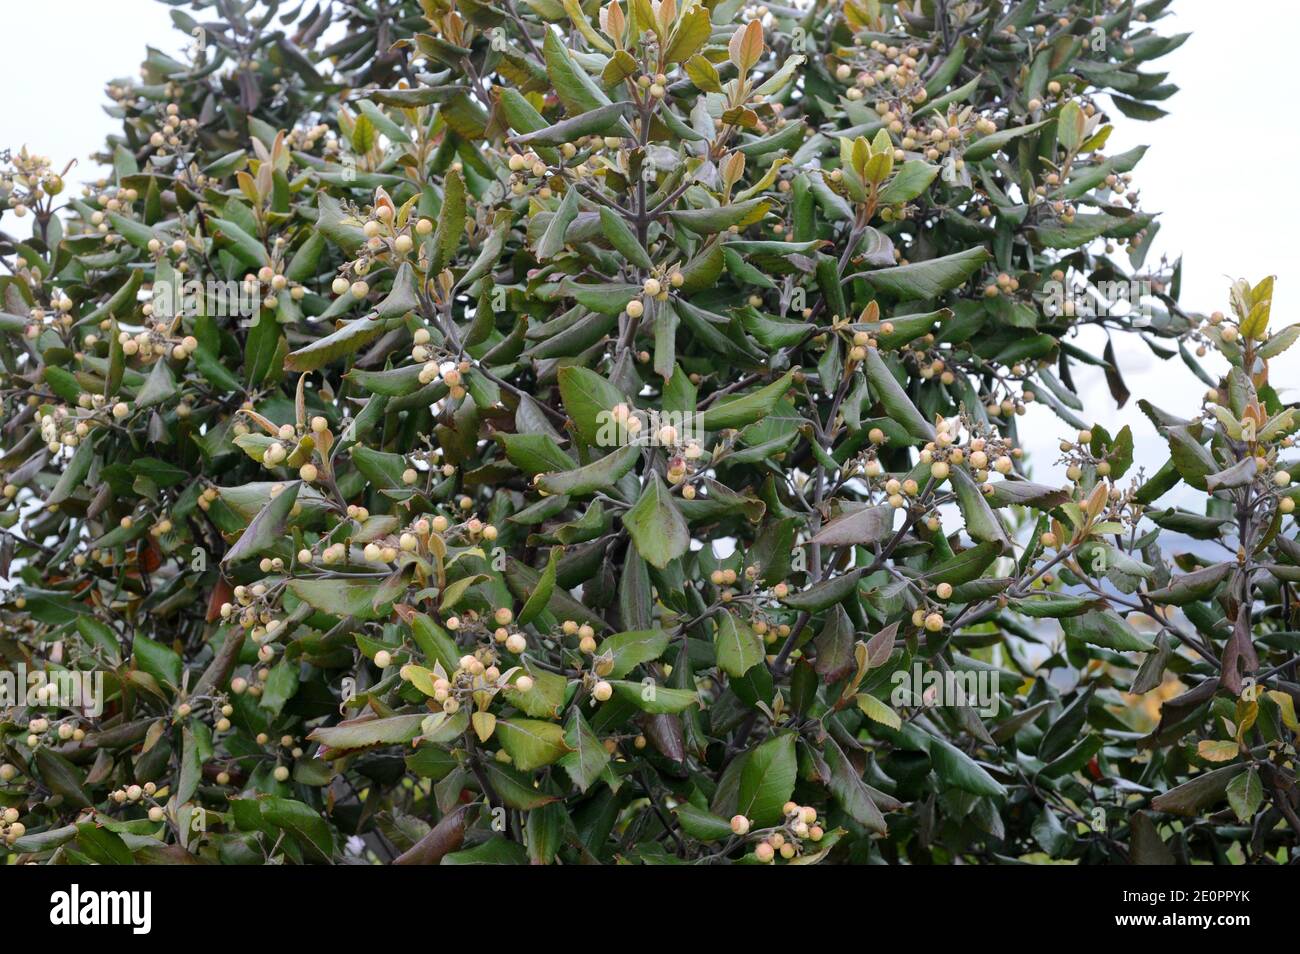 Assegai or Cape lancewood (Curtisia dentata) is a protected tree native to South Africa. Stock Photo